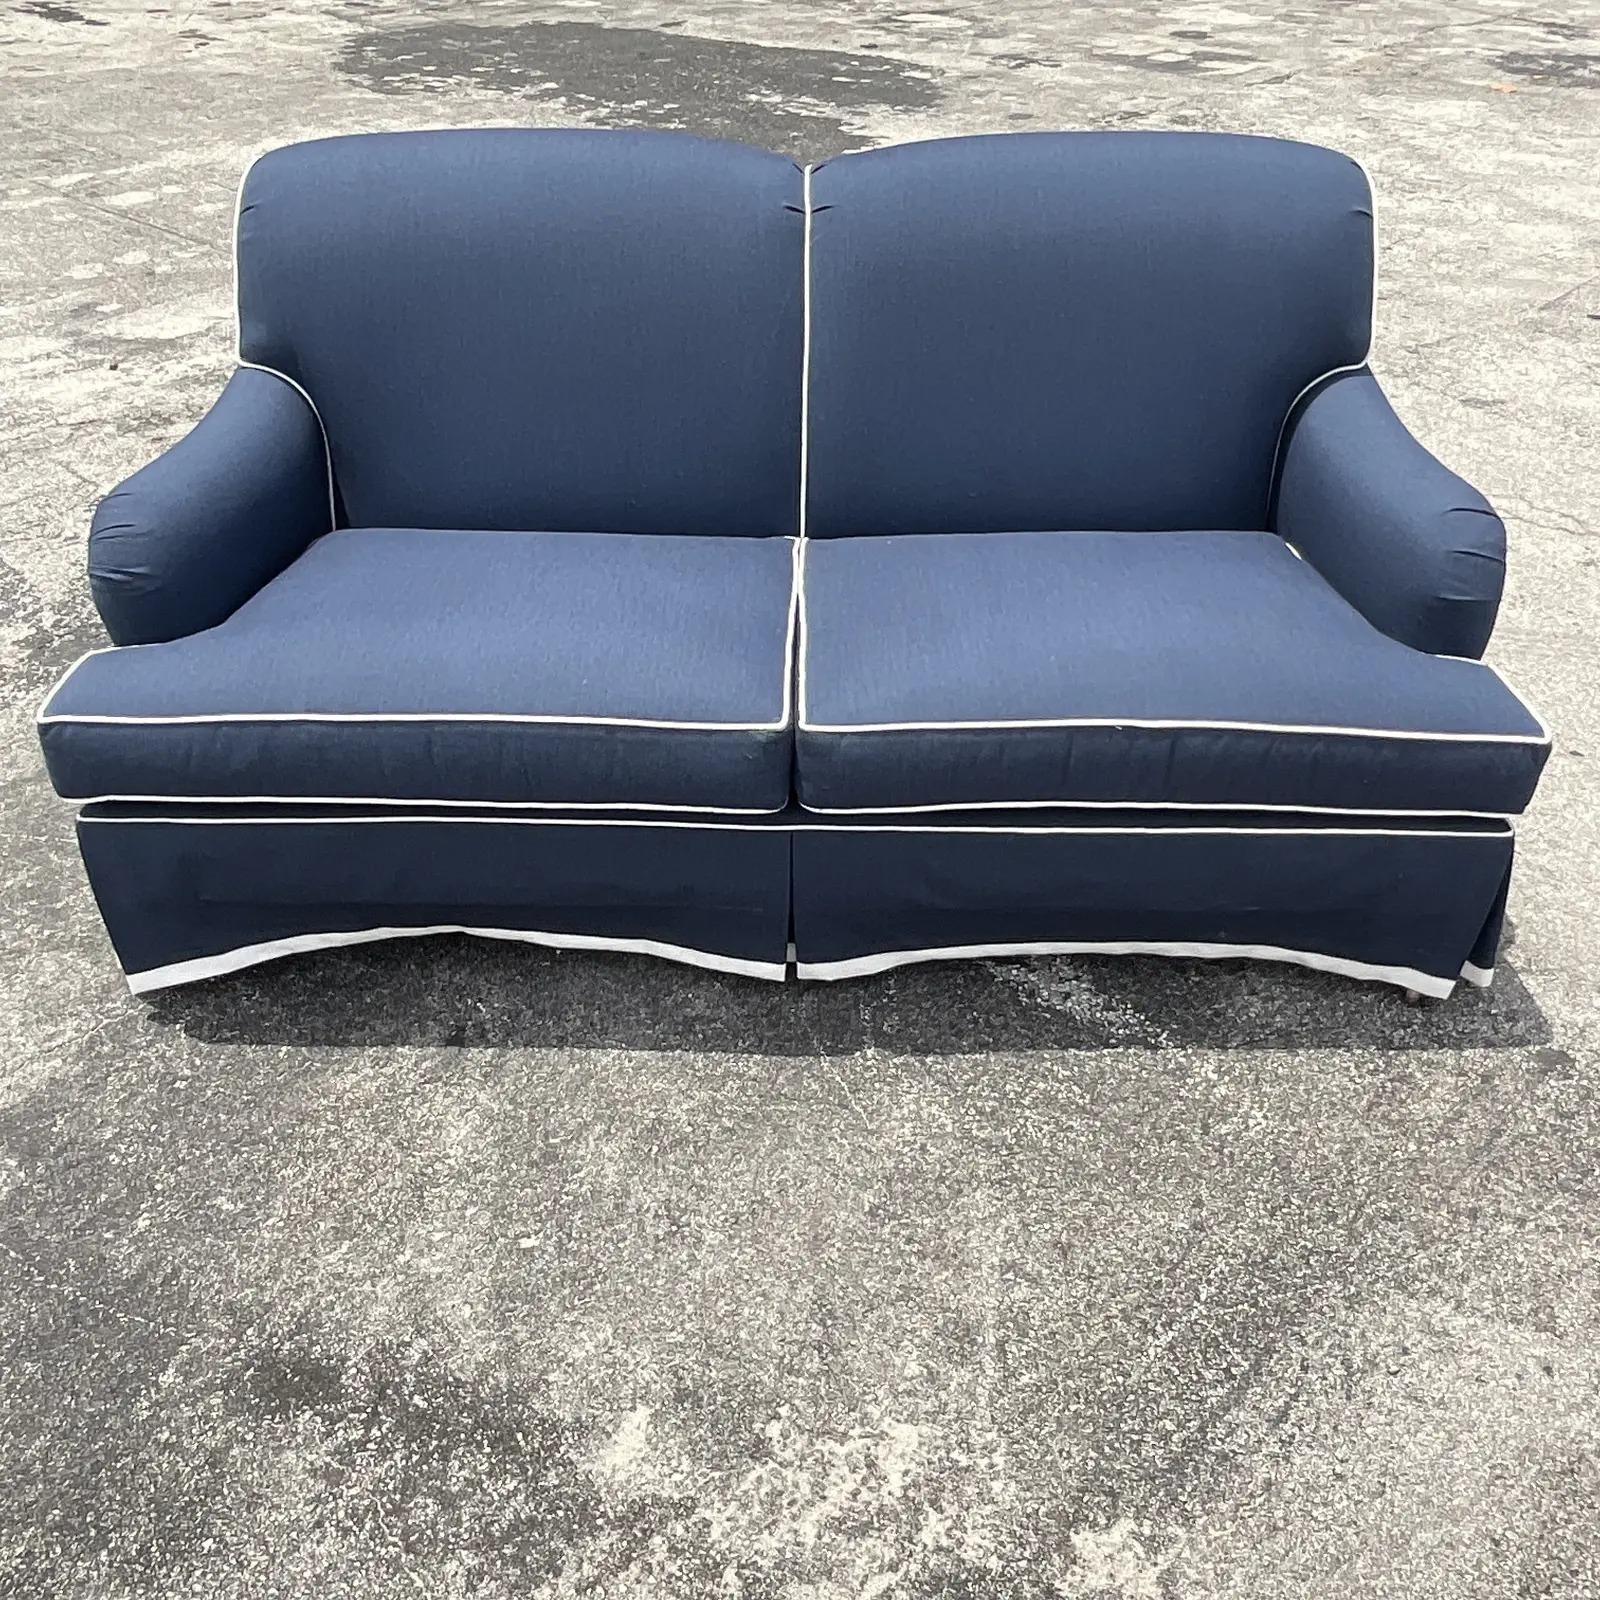 blue sofa with white piping